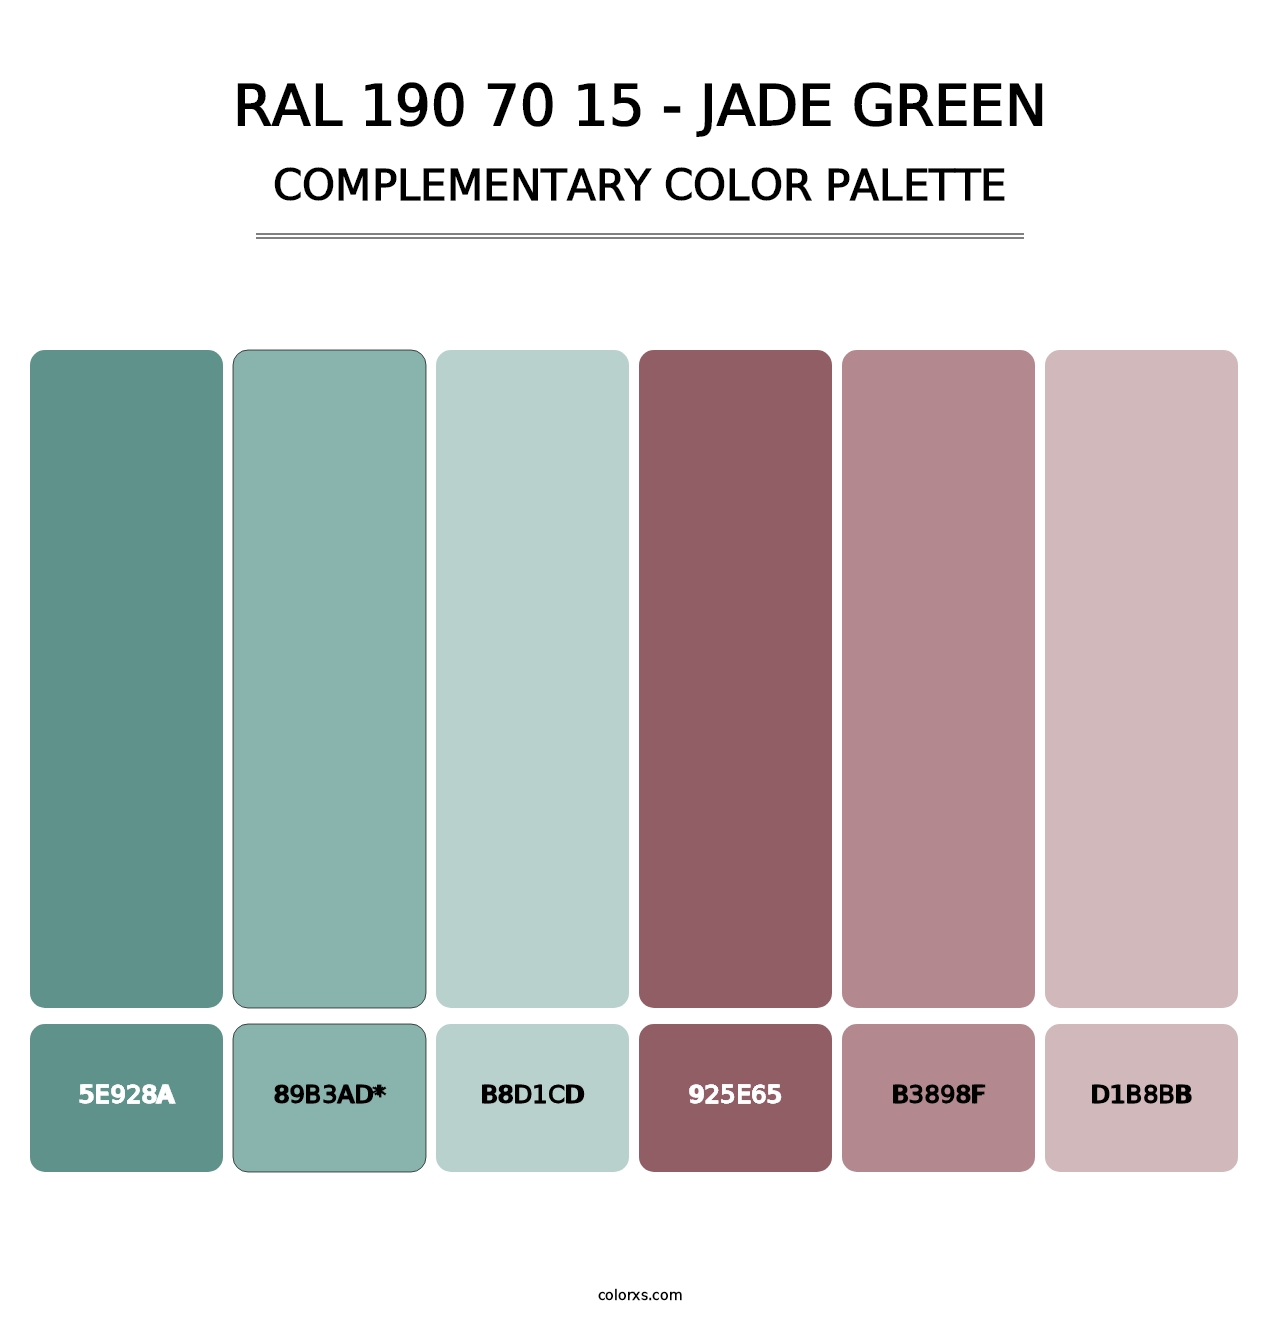 RAL 190 70 15 - Jade Green - Complementary Color Palette